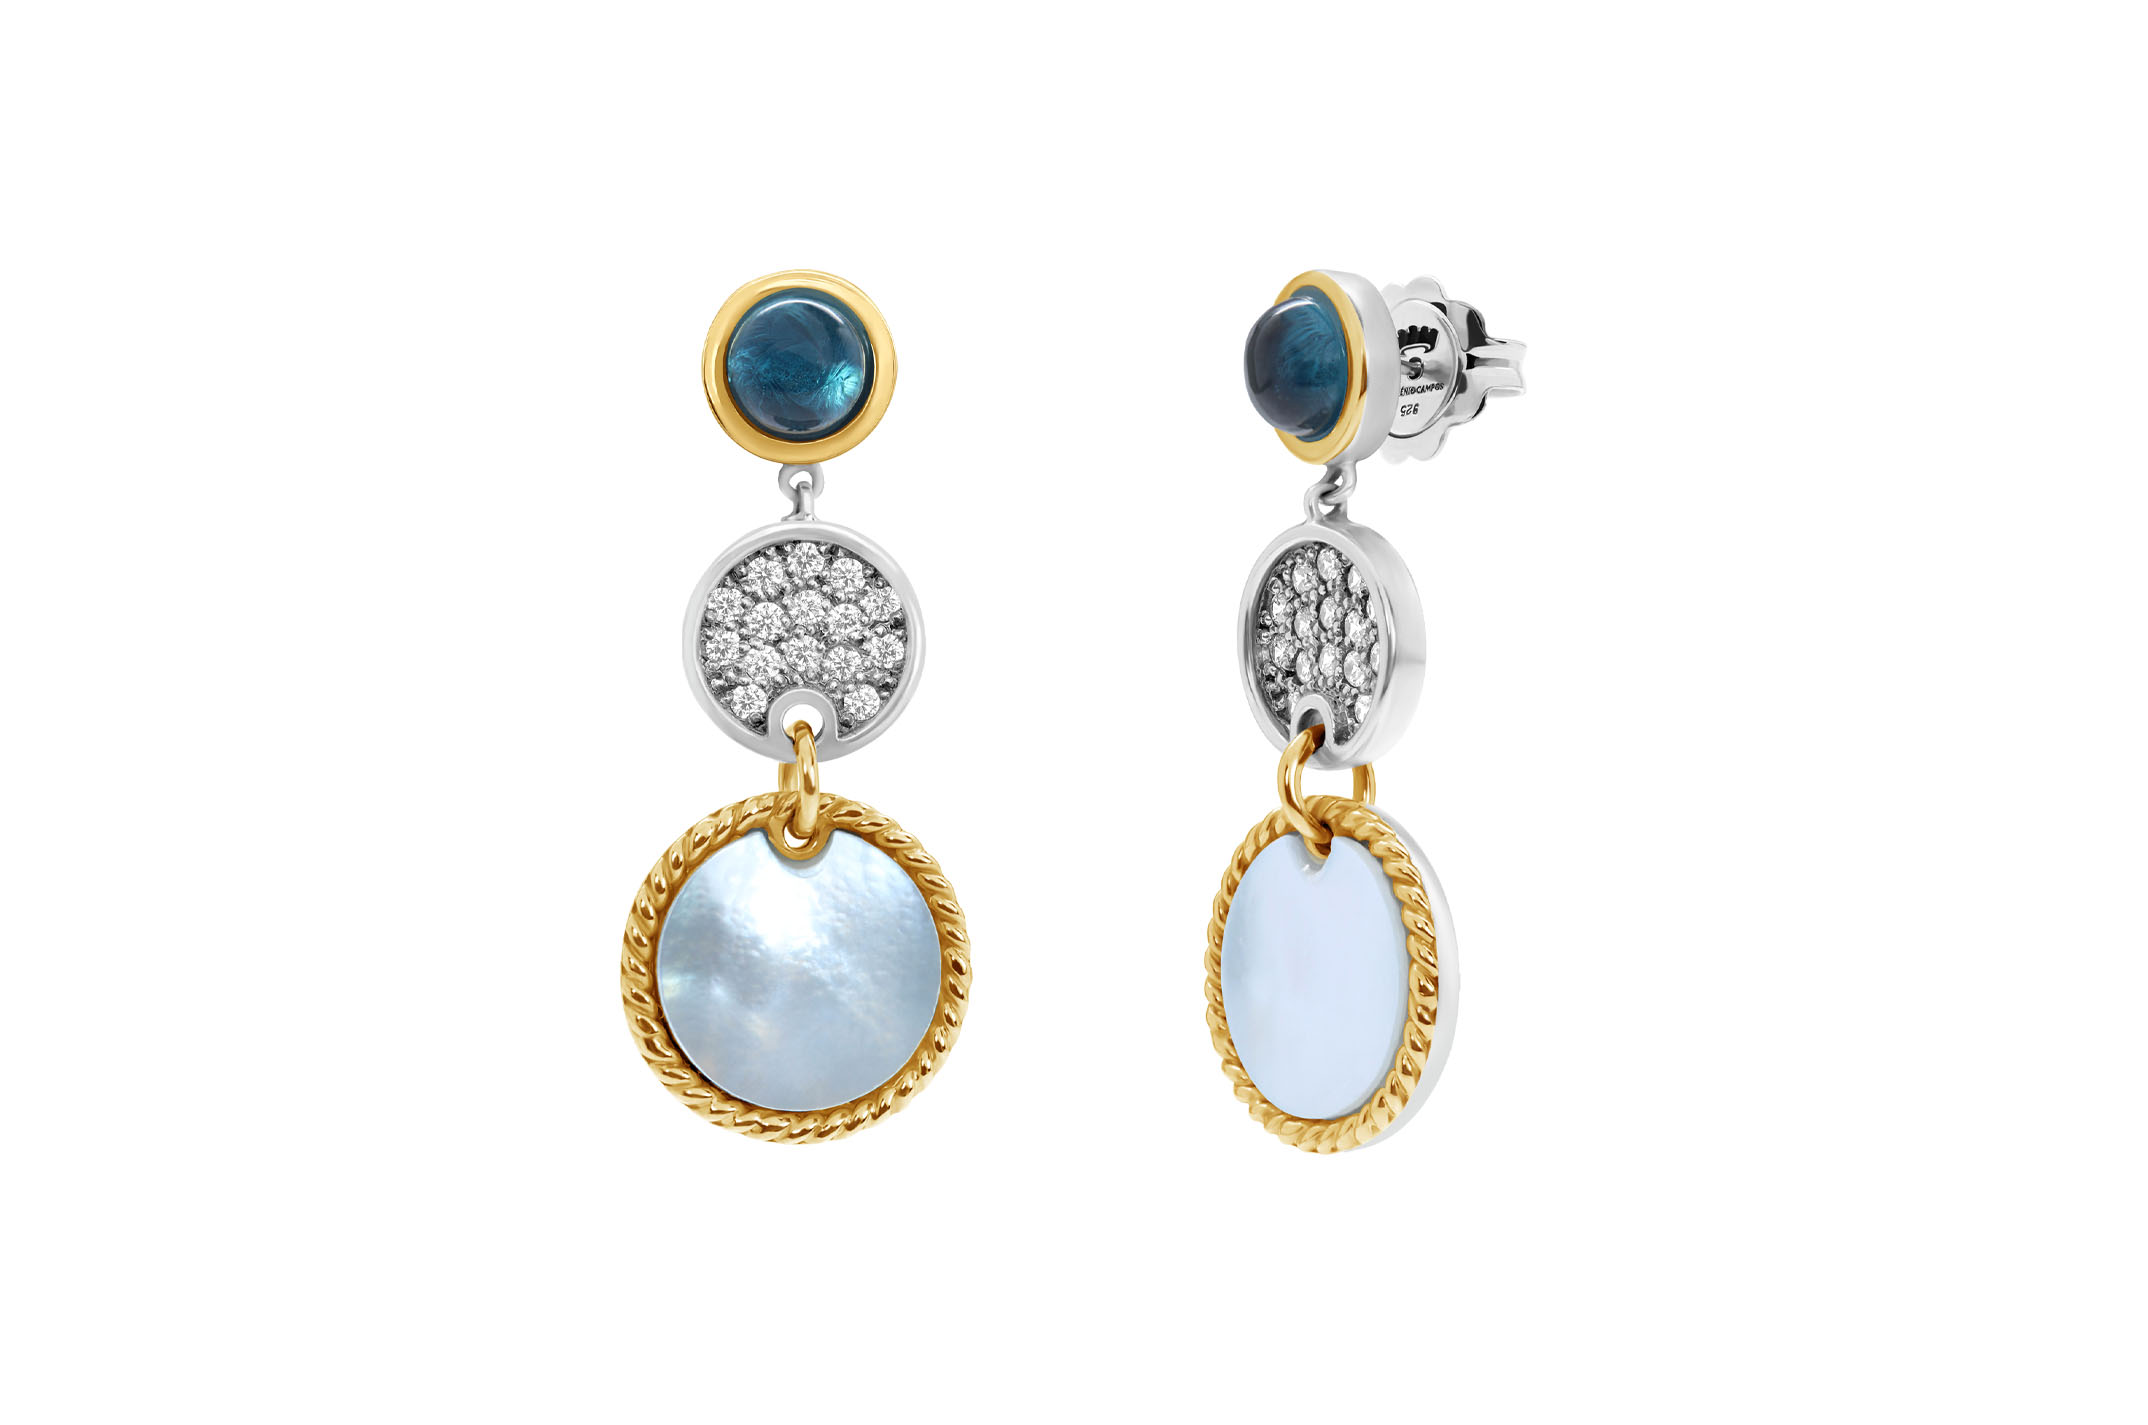 Jewel: earrings;Material: 925 silver and 9K gold;Weight: 8.5 gr (silver) and 1.9 gr (gold);Stones: zirconias & mother-of-pearl;Color: white and yellow;Size: 3.5 cm;Gender: woman